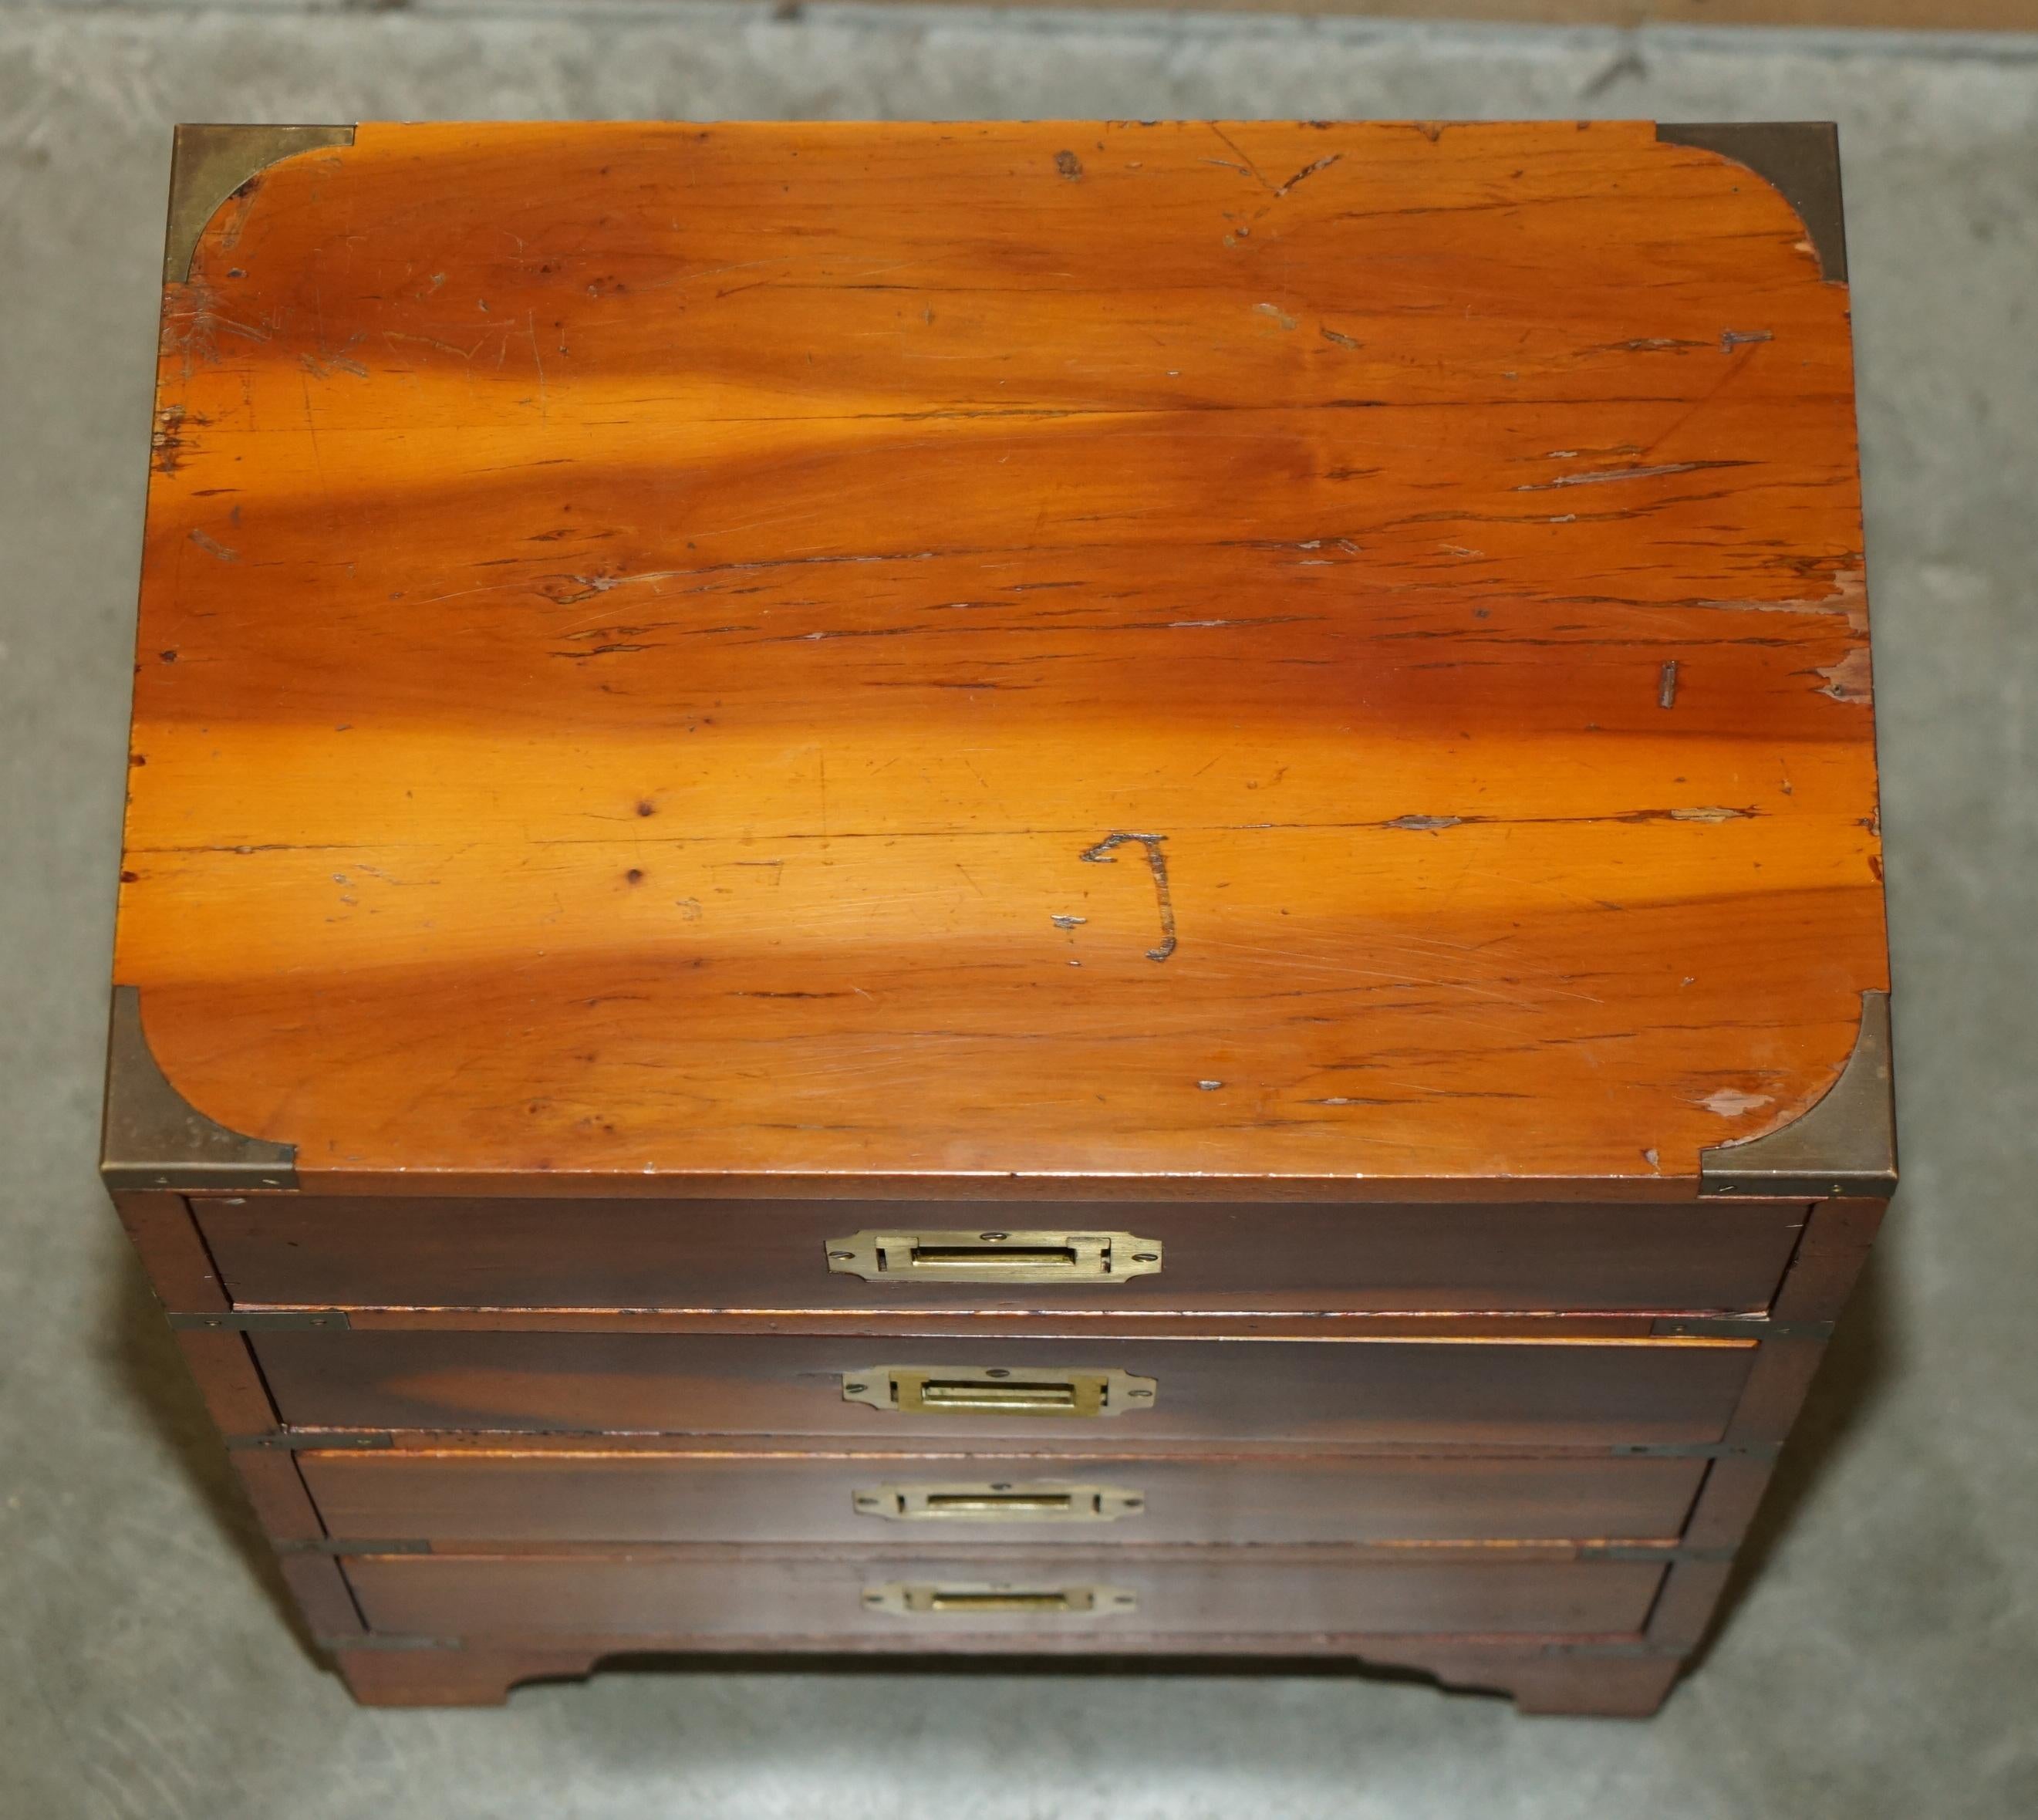 English PAIR OF ViNTAGE DISTRESSED MILITARY CAMPAIGN BURR YEW WOOD SIDE TABLE DRAWERS For Sale